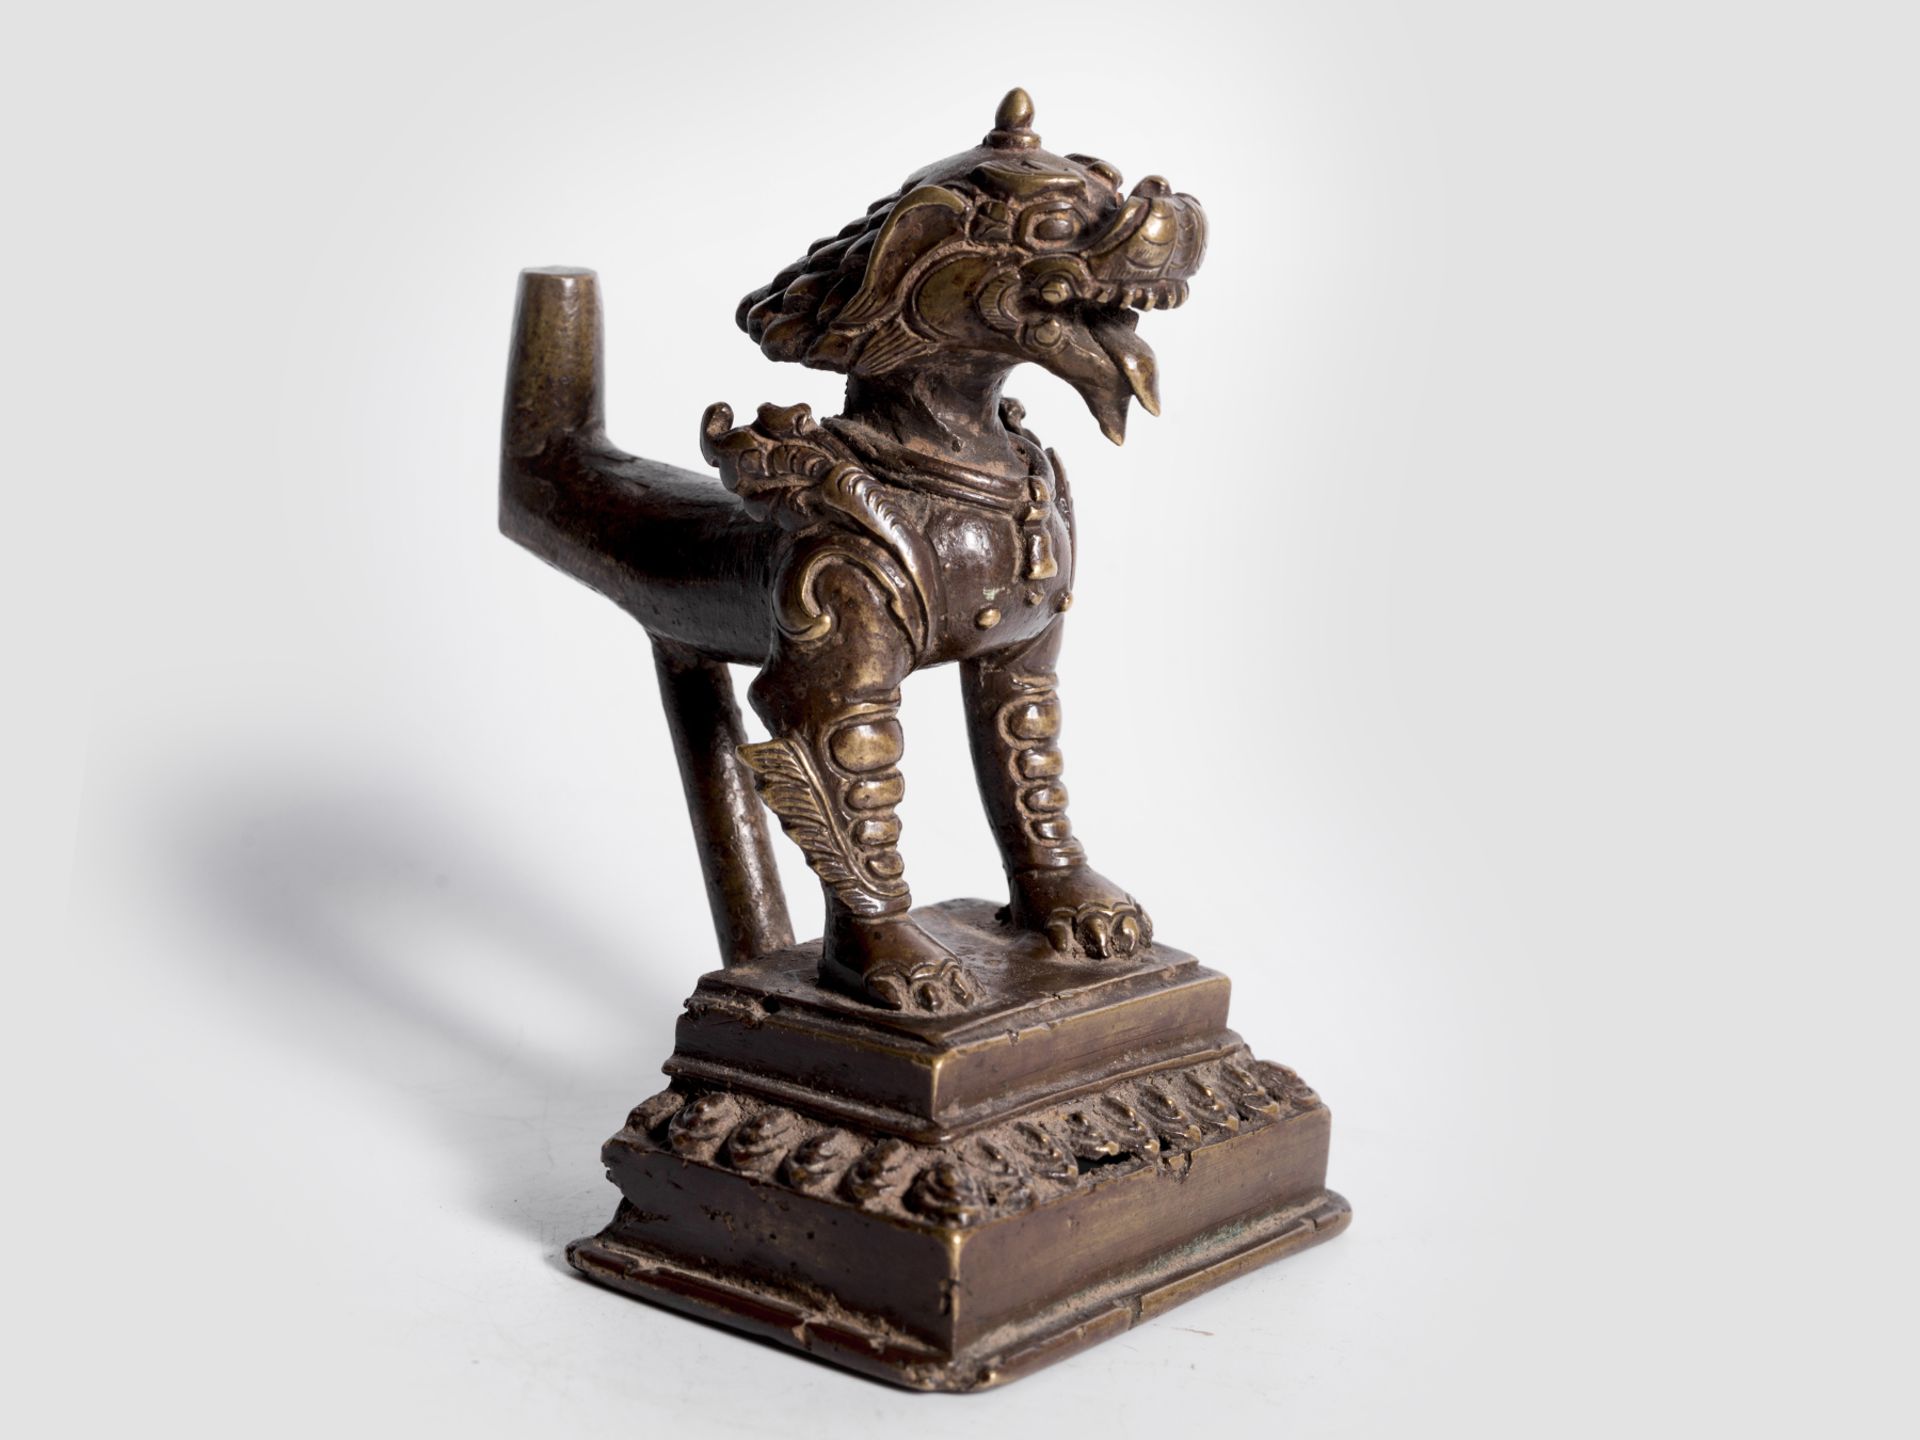 India, Bronze statue, 16th - 18th century or earlier - Image 2 of 6